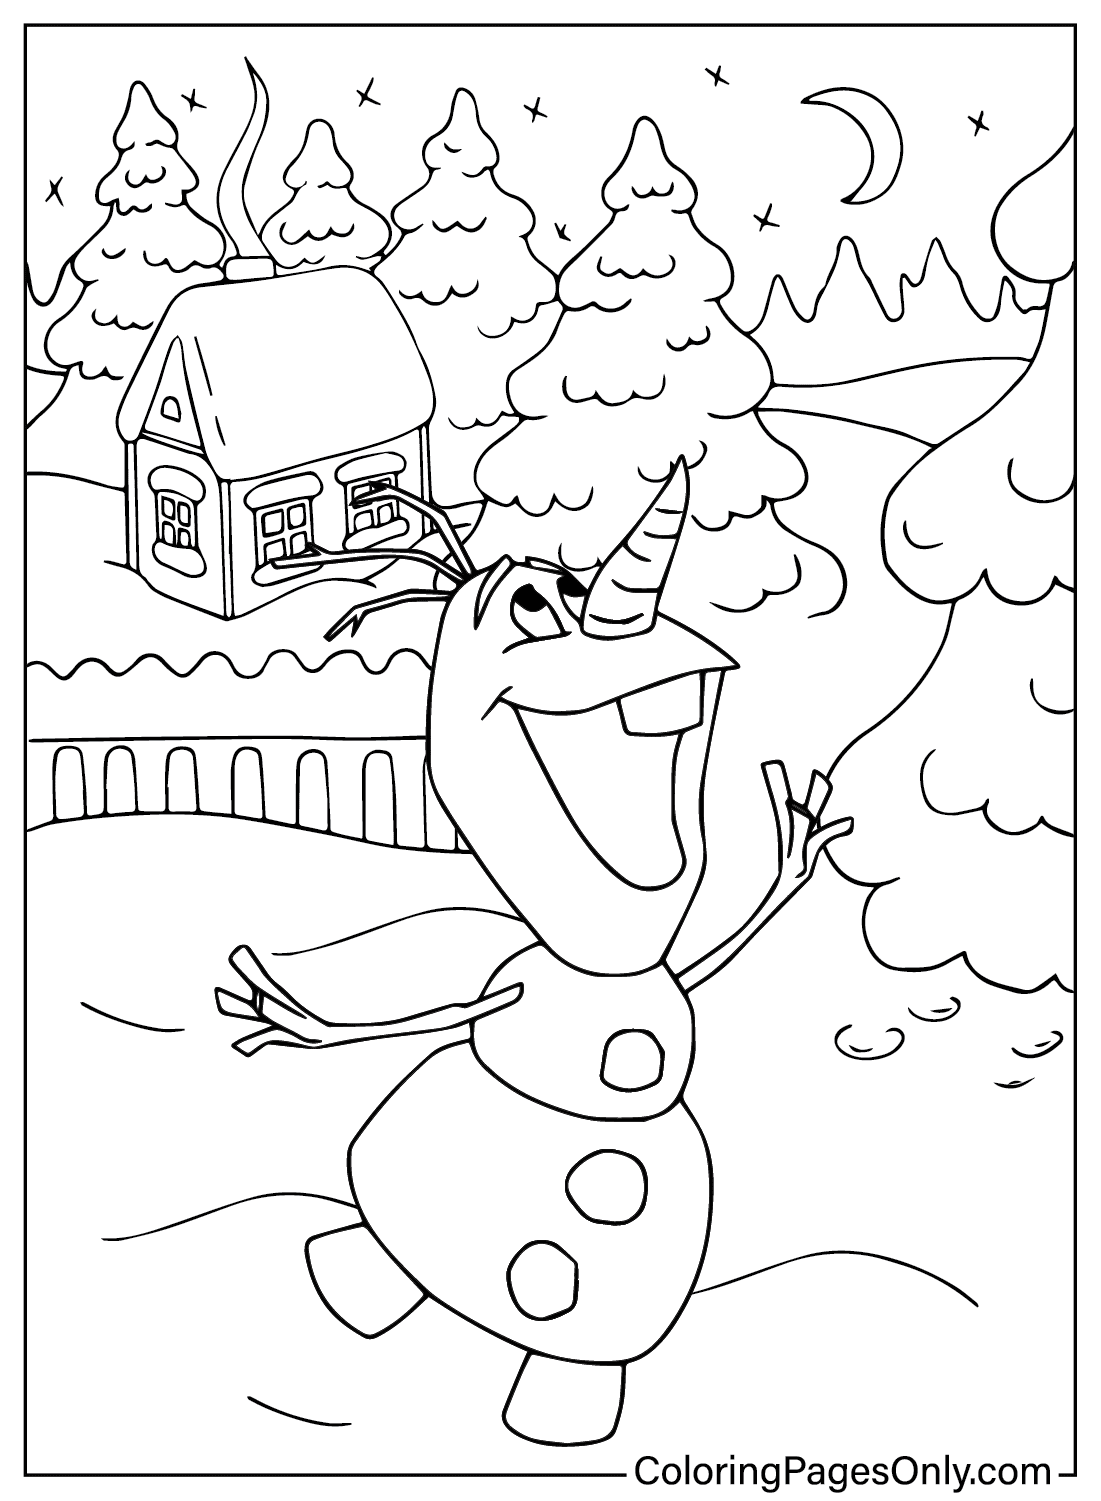 Funny Snowman Coloring Page